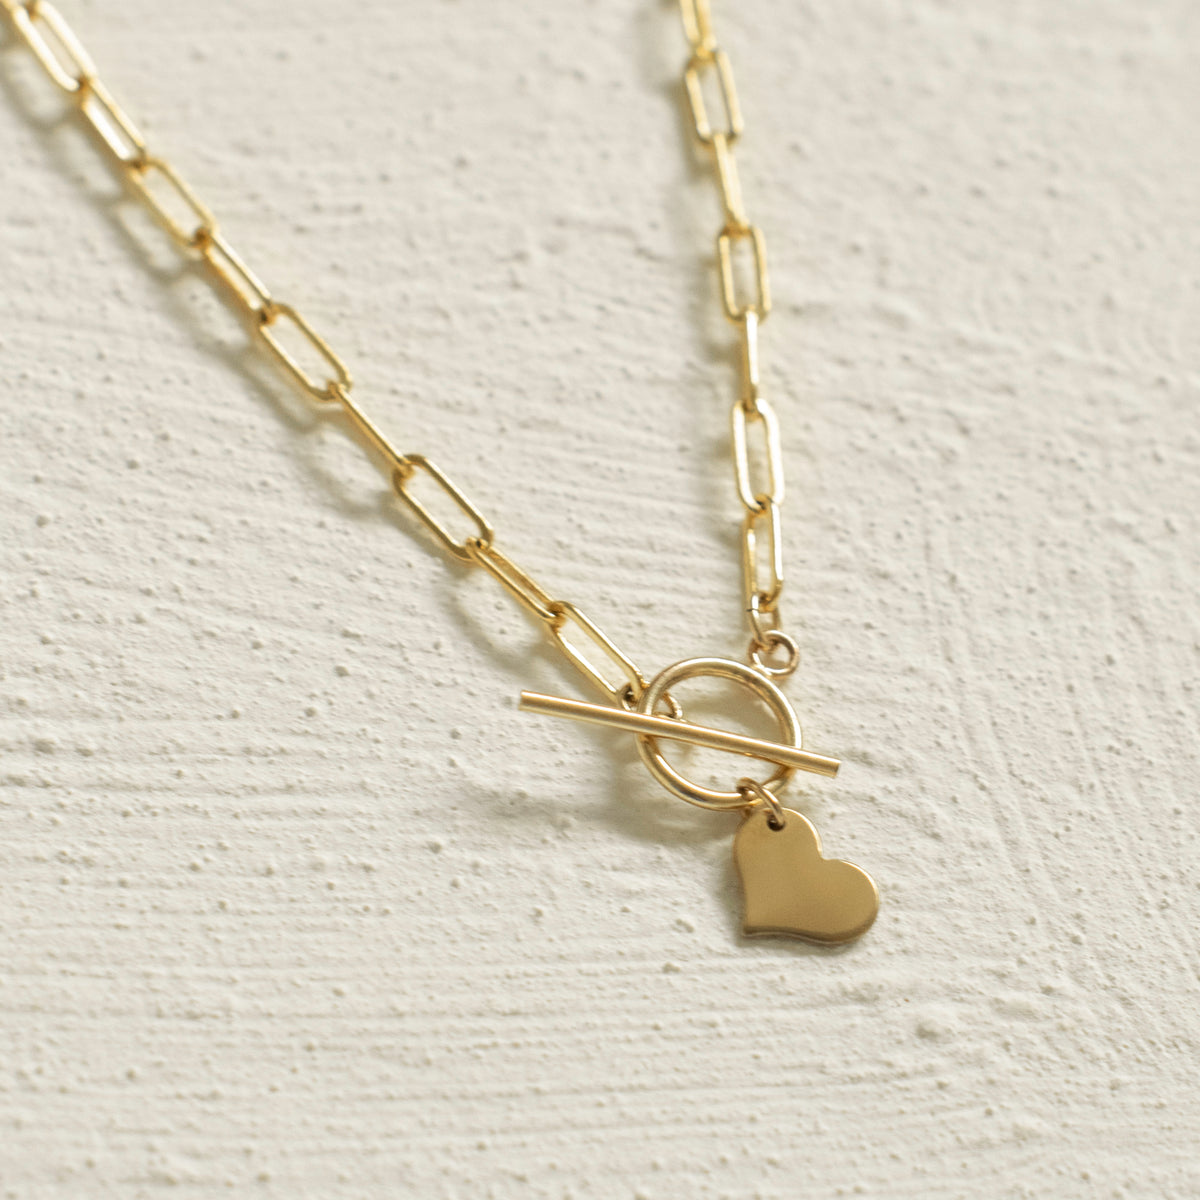 14K Gold Filled Tiny Heart Charm on a Bold Paper Clip Necklace with Toggle Closure